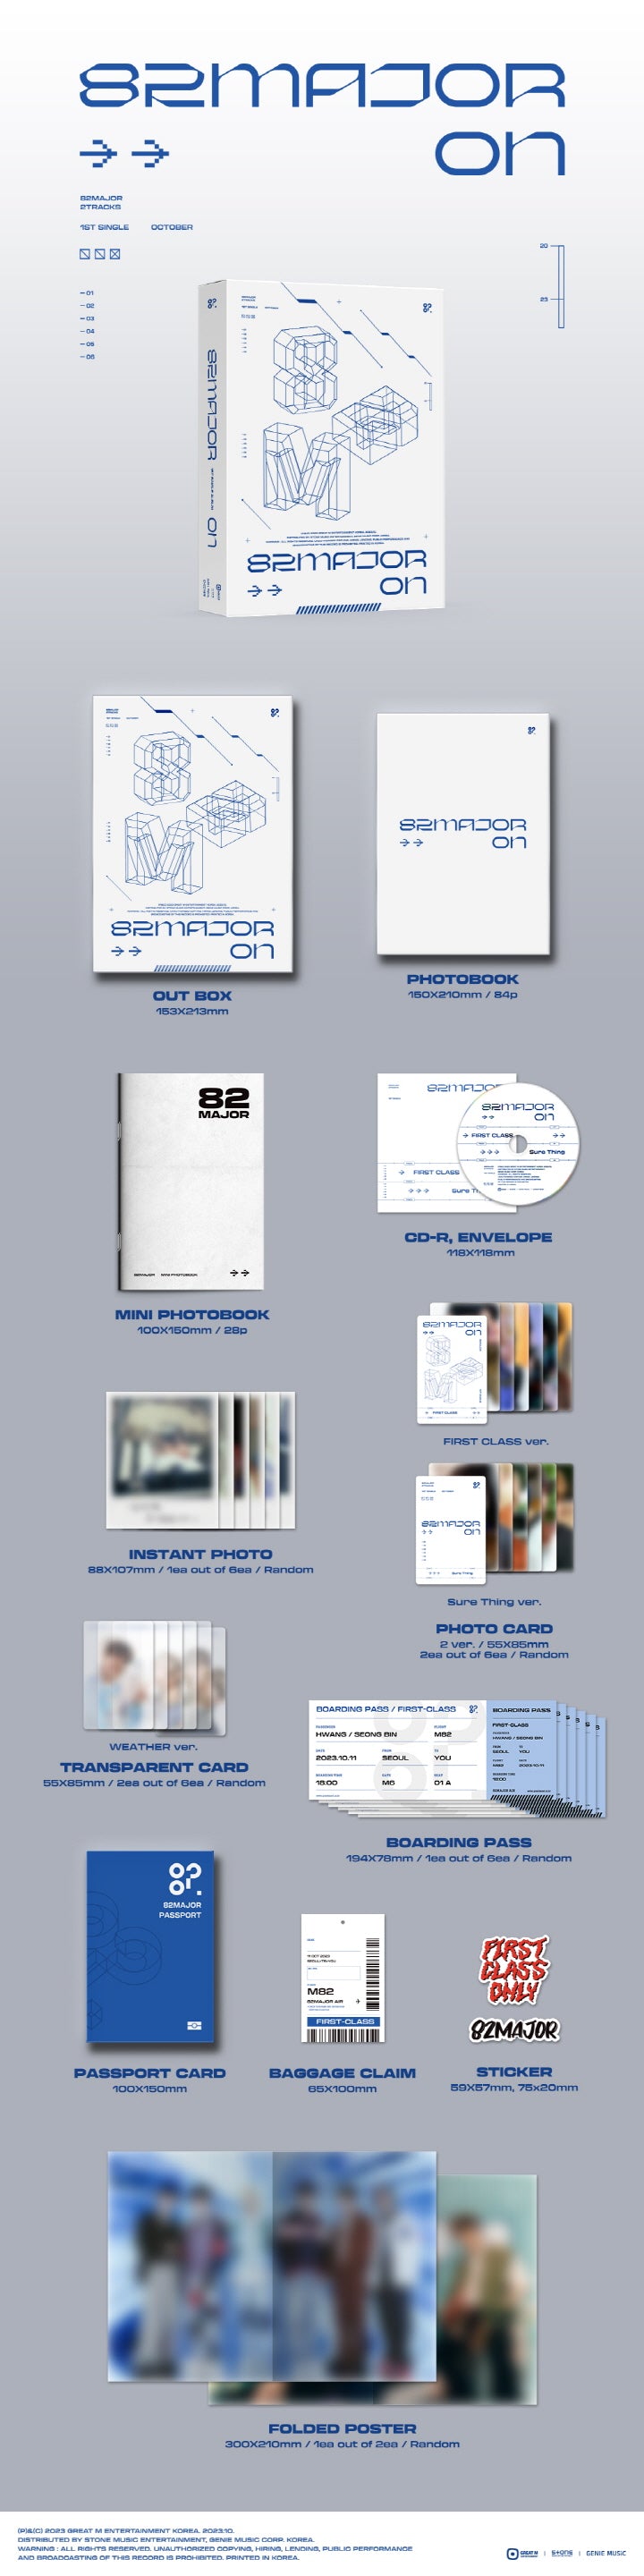 1 CD
1 Photo Book (84 pages)
1 Mini Photo Book (28 pages)
1 Instant Photo (random out of 6 types)
2 Photo Cards (random ou...